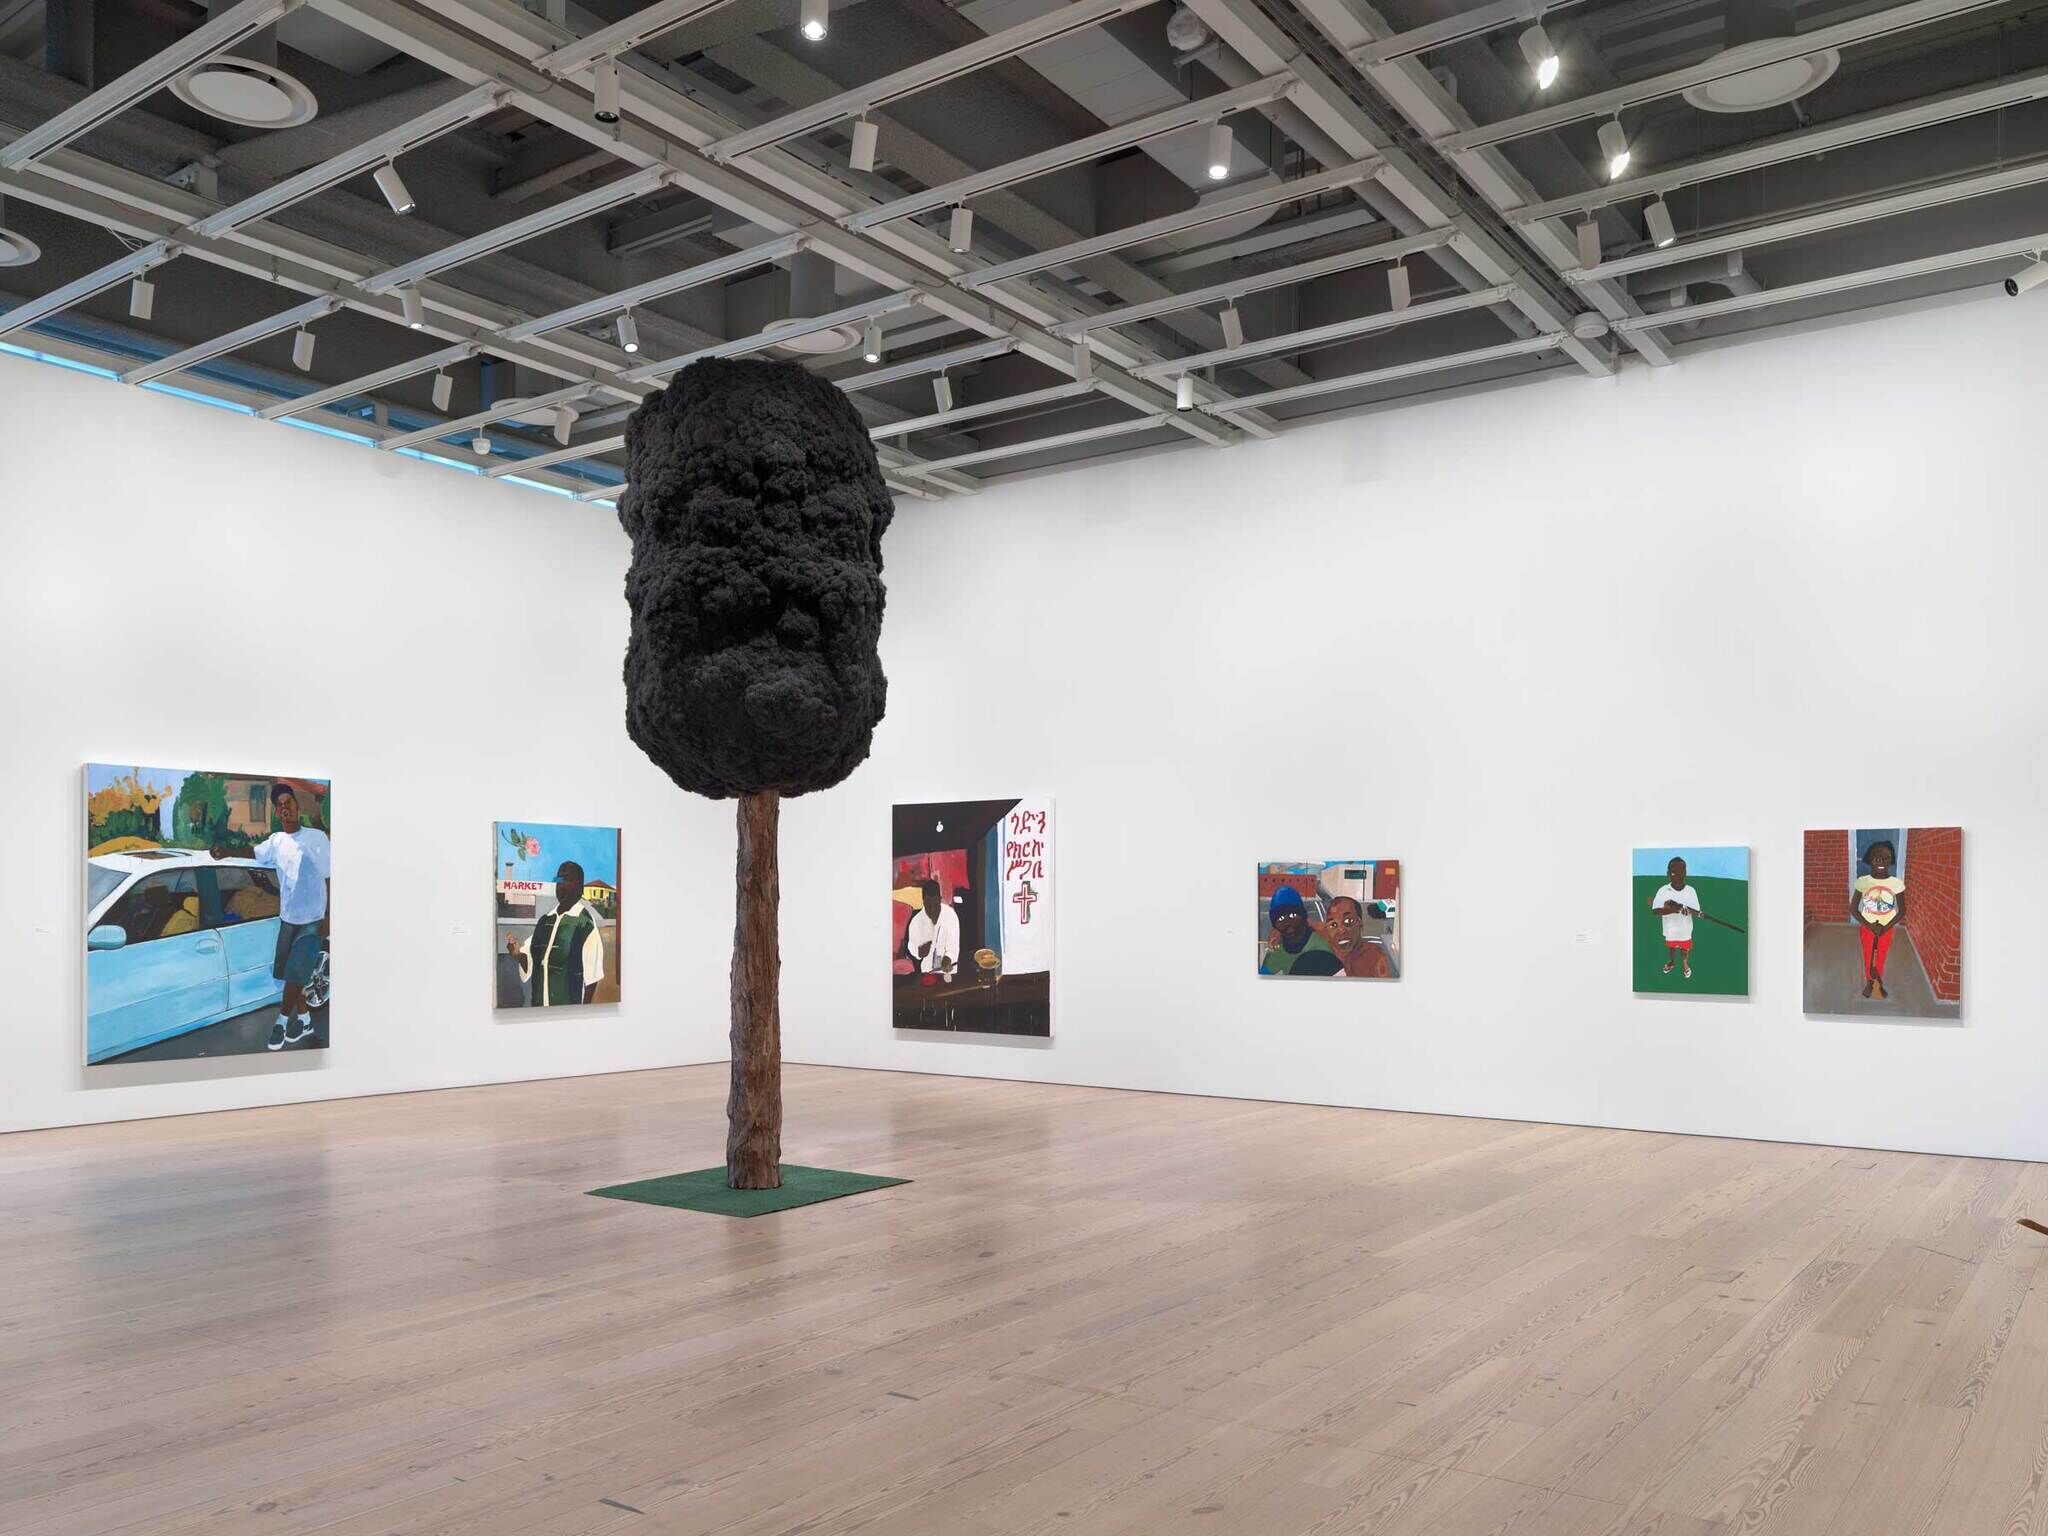 A large sculpture of a tree with hair-like leaves in front of multiple painted portraits.